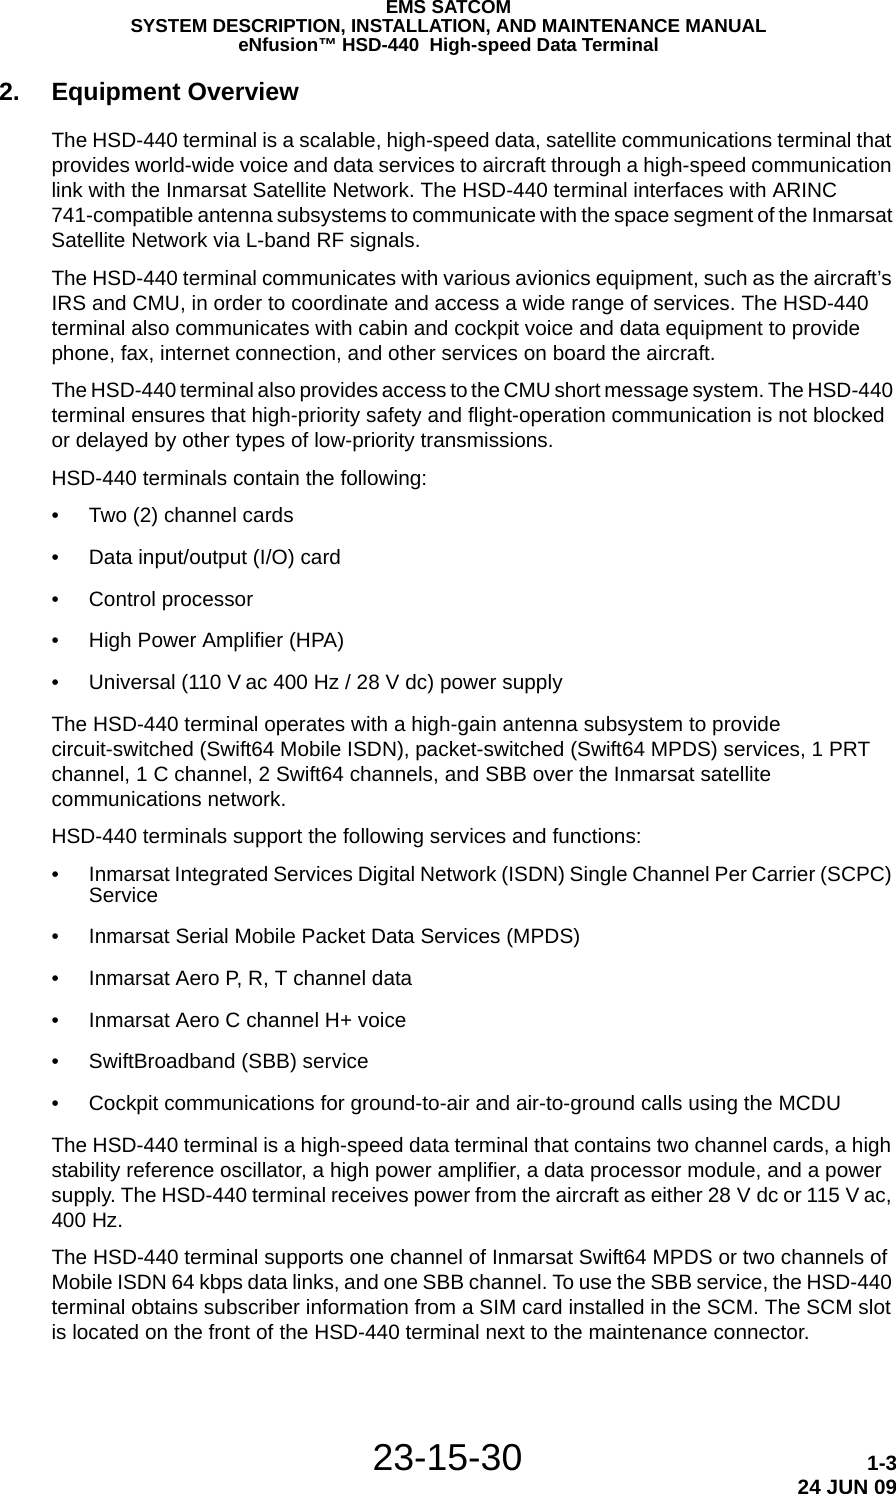 EMS SATCOMSYSTEM DESCRIPTION, INSTALLATION, AND MAINTENANCE MANUALeNfusion™ HSD-440  High-speed Data Terminal23-15-30 1-324 JUN 092. Equipment OverviewThe HSD-440 terminal is a scalable, high-speed data, satellite communications terminal that provides world-wide voice and data services to aircraft through a high-speed communication link with the Inmarsat Satellite Network. The HSD-440 terminal interfaces with ARINC 741-compatible antenna subsystems to communicate with the space segment of the Inmarsat Satellite Network via L-band RF signals.The HSD-440 terminal communicates with various avionics equipment, such as the aircraft’s IRS and CMU, in order to coordinate and access a wide range of services. The HSD-440 terminal also communicates with cabin and cockpit voice and data equipment to provide phone, fax, internet connection, and other services on board the aircraft.The HSD-440 terminal also provides access to the CMU short message system. The HSD-440 terminal ensures that high-priority safety and flight-operation communication is not blocked or delayed by other types of low-priority transmissions.HSD-440 terminals contain the following:• Two (2) channel cards• Data input/output (I/O) card• Control processor• High Power Amplifier (HPA)• Universal (110 V ac 400 Hz / 28 V dc) power supplyThe HSD-440 terminal operates with a high-gain antenna subsystem to provide circuit-switched (Swift64 Mobile ISDN), packet-switched (Swift64 MPDS) services, 1 PRT channel, 1 C channel, 2 Swift64 channels, and SBB over the Inmarsat satellite communications network.HSD-440 terminals support the following services and functions:• Inmarsat Integrated Services Digital Network (ISDN) Single Channel Per Carrier (SCPC) Service• Inmarsat Serial Mobile Packet Data Services (MPDS)• Inmarsat Aero P, R, T channel data• Inmarsat Aero C channel H+ voice• SwiftBroadband (SBB) service• Cockpit communications for ground-to-air and air-to-ground calls using the MCDUThe HSD-440 terminal is a high-speed data terminal that contains two channel cards, a high stability reference oscillator, a high power amplifier, a data processor module, and a power supply. The HSD-440 terminal receives power from the aircraft as either 28 V dc or 115 V ac, 400 Hz.The HSD-440 terminal supports one channel of Inmarsat Swift64 MPDS or two channels of Mobile ISDN 64 kbps data links, and one SBB channel. To use the SBB service, the HSD-440 terminal obtains subscriber information from a SIM card installed in the SCM. The SCM slot is located on the front of the HSD-440 terminal next to the maintenance connector.